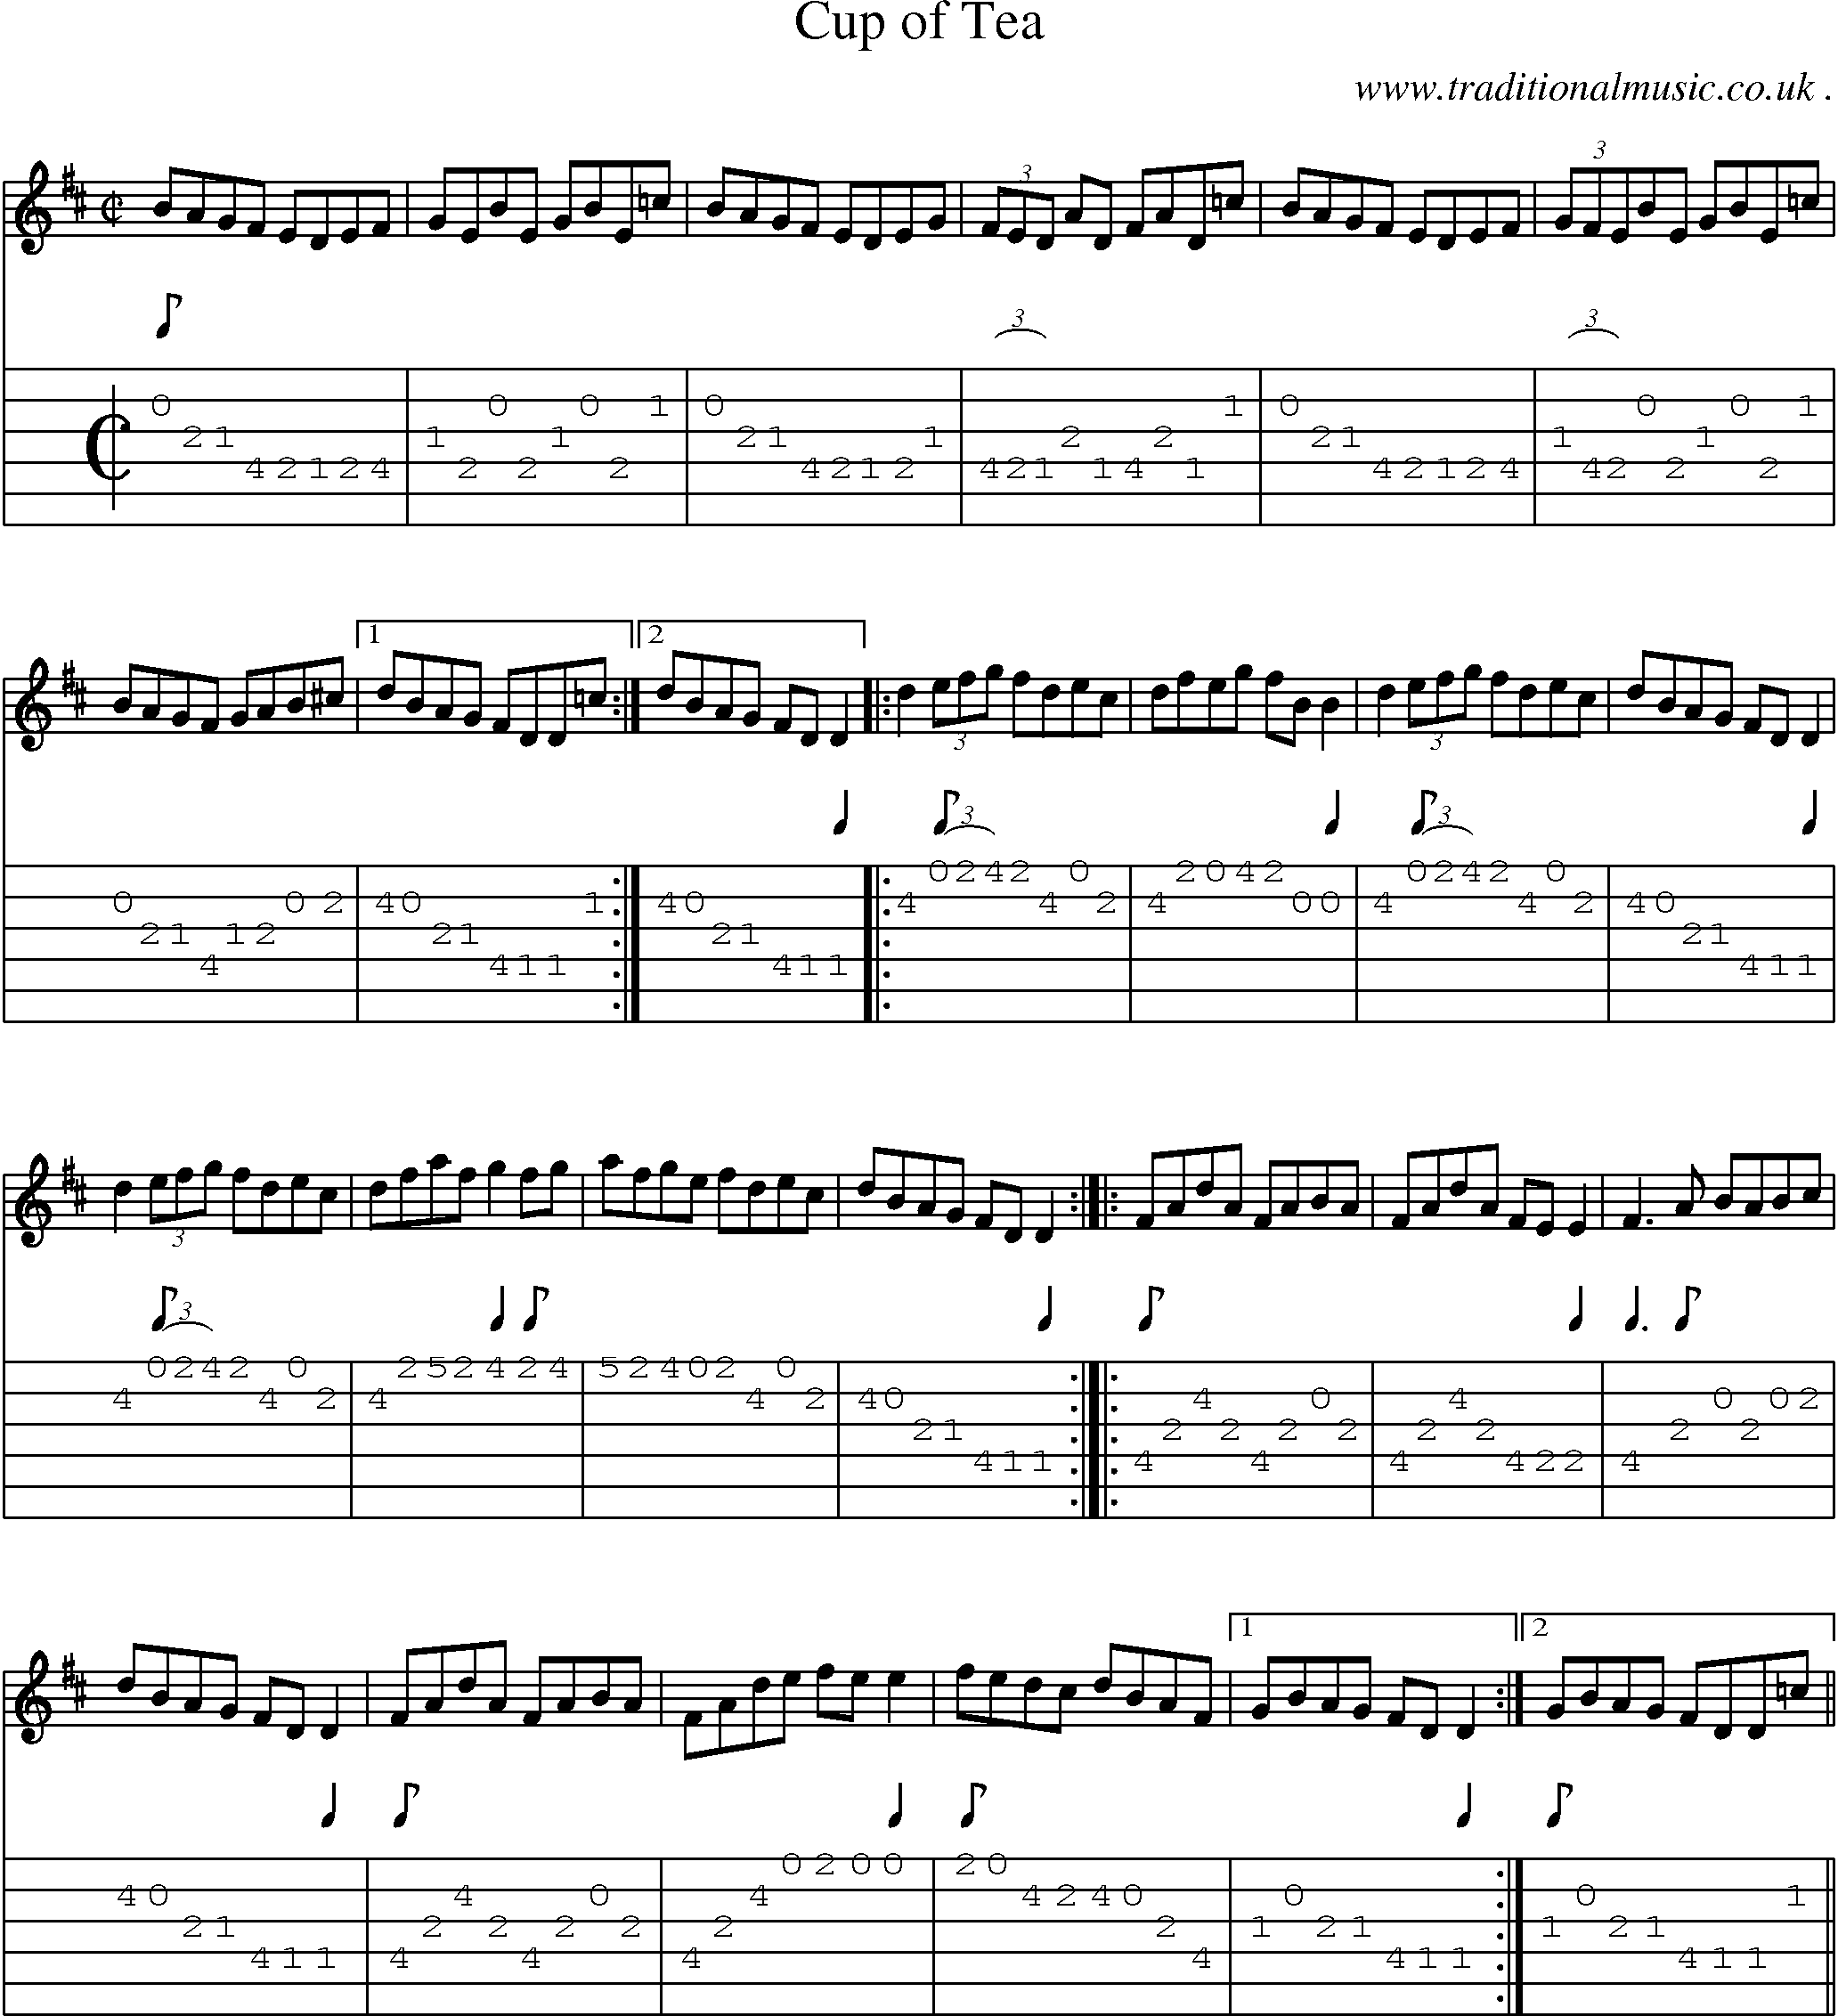 Sheet-Music and Guitar Tabs for Cup Of Tea